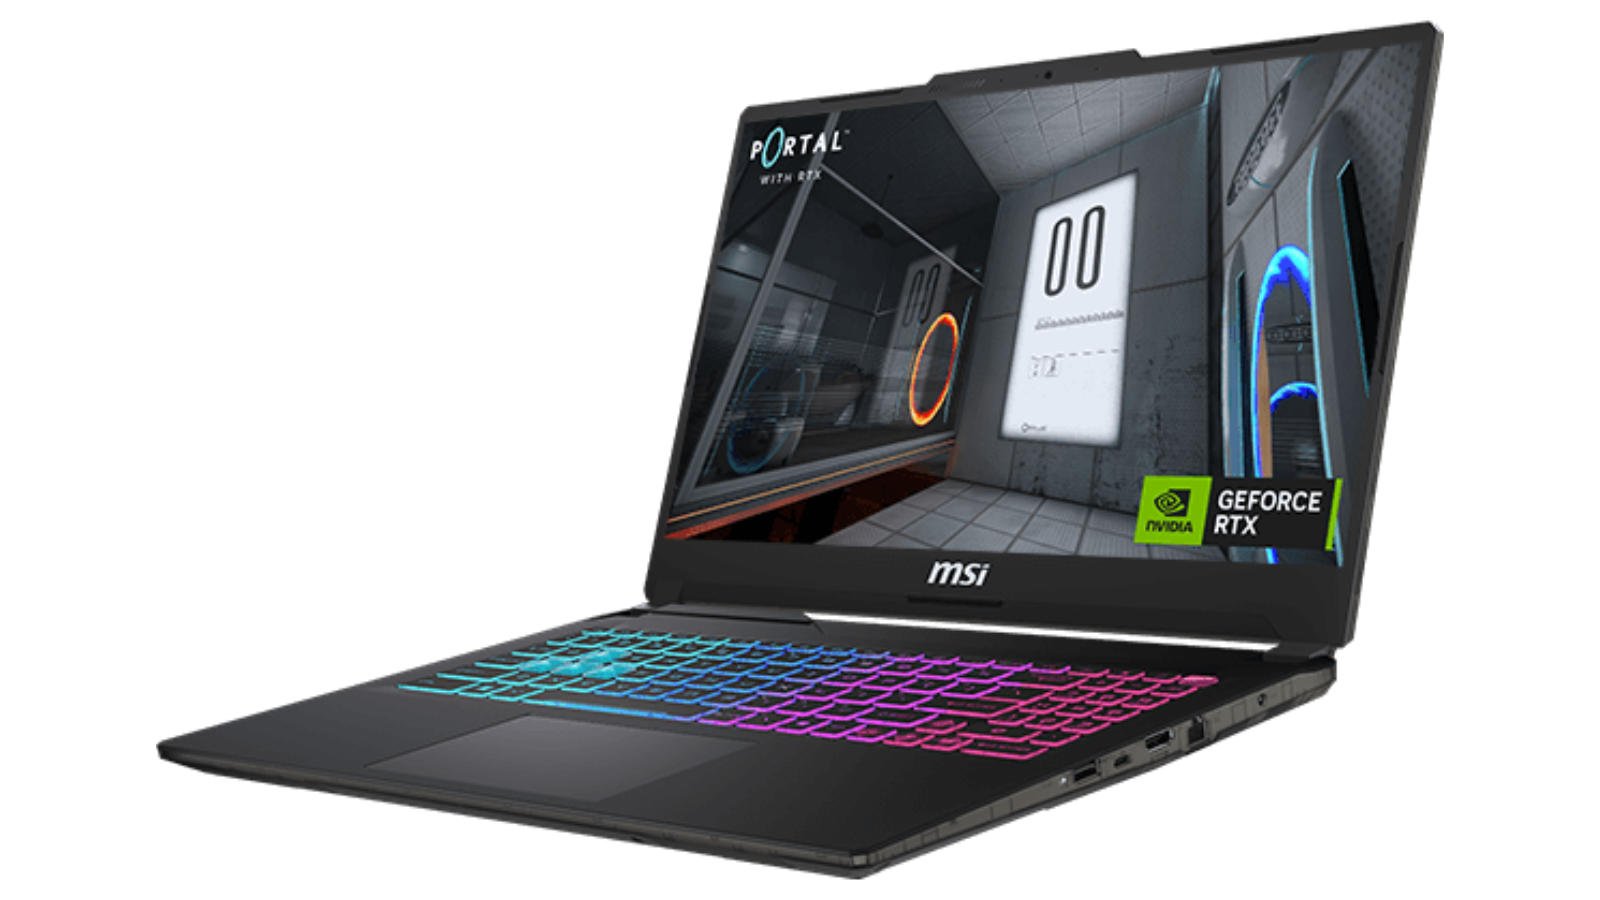 MSI Cyborg 15 gaming laptop product photo against a white background.